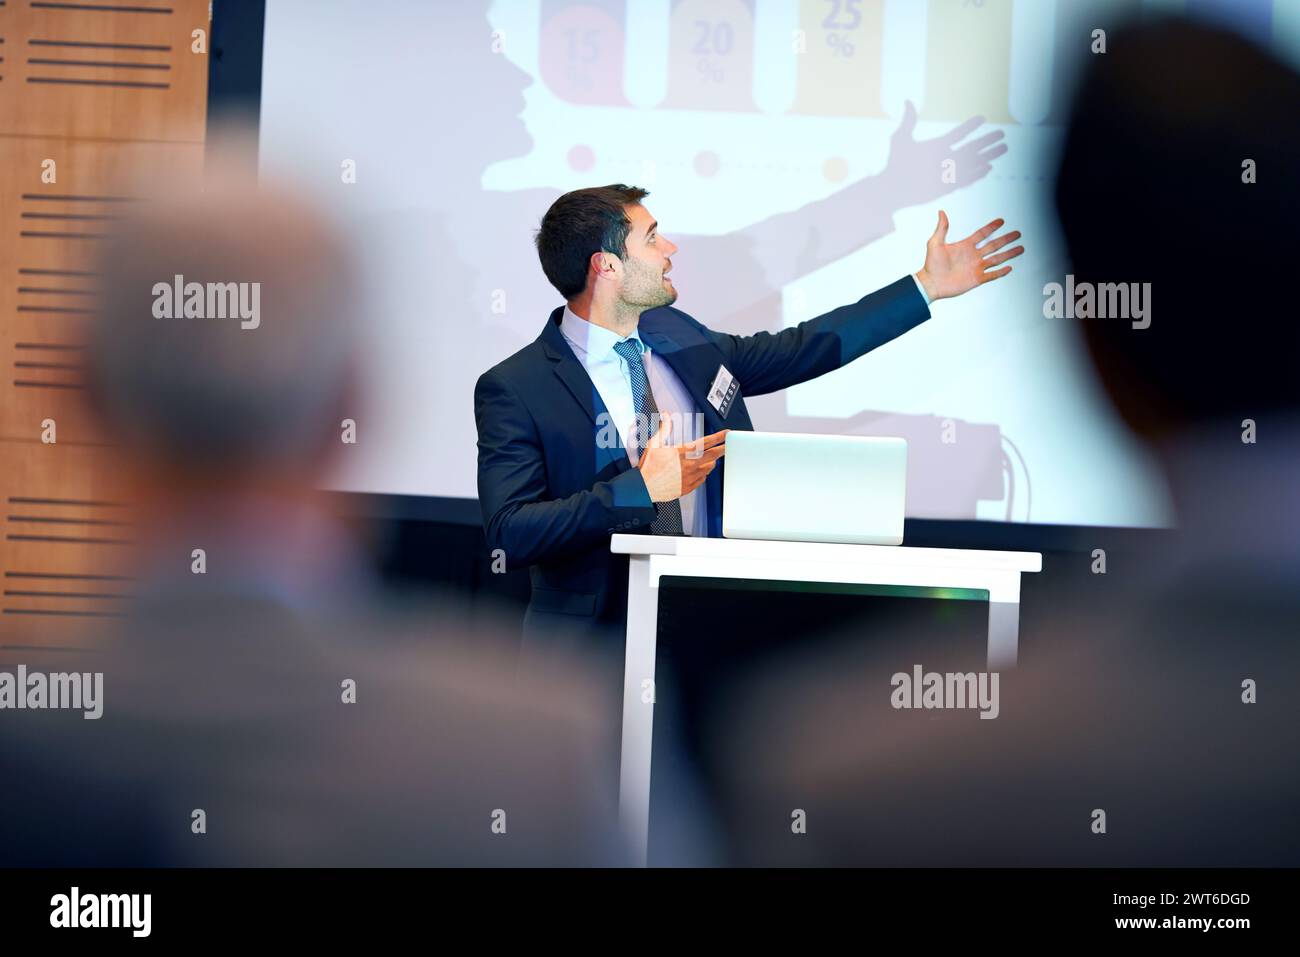 Business man, presentation and pointing at projector screen, conference or workshop with laptop for slideshow. Corporate training, seminar and speaker Stock Photo